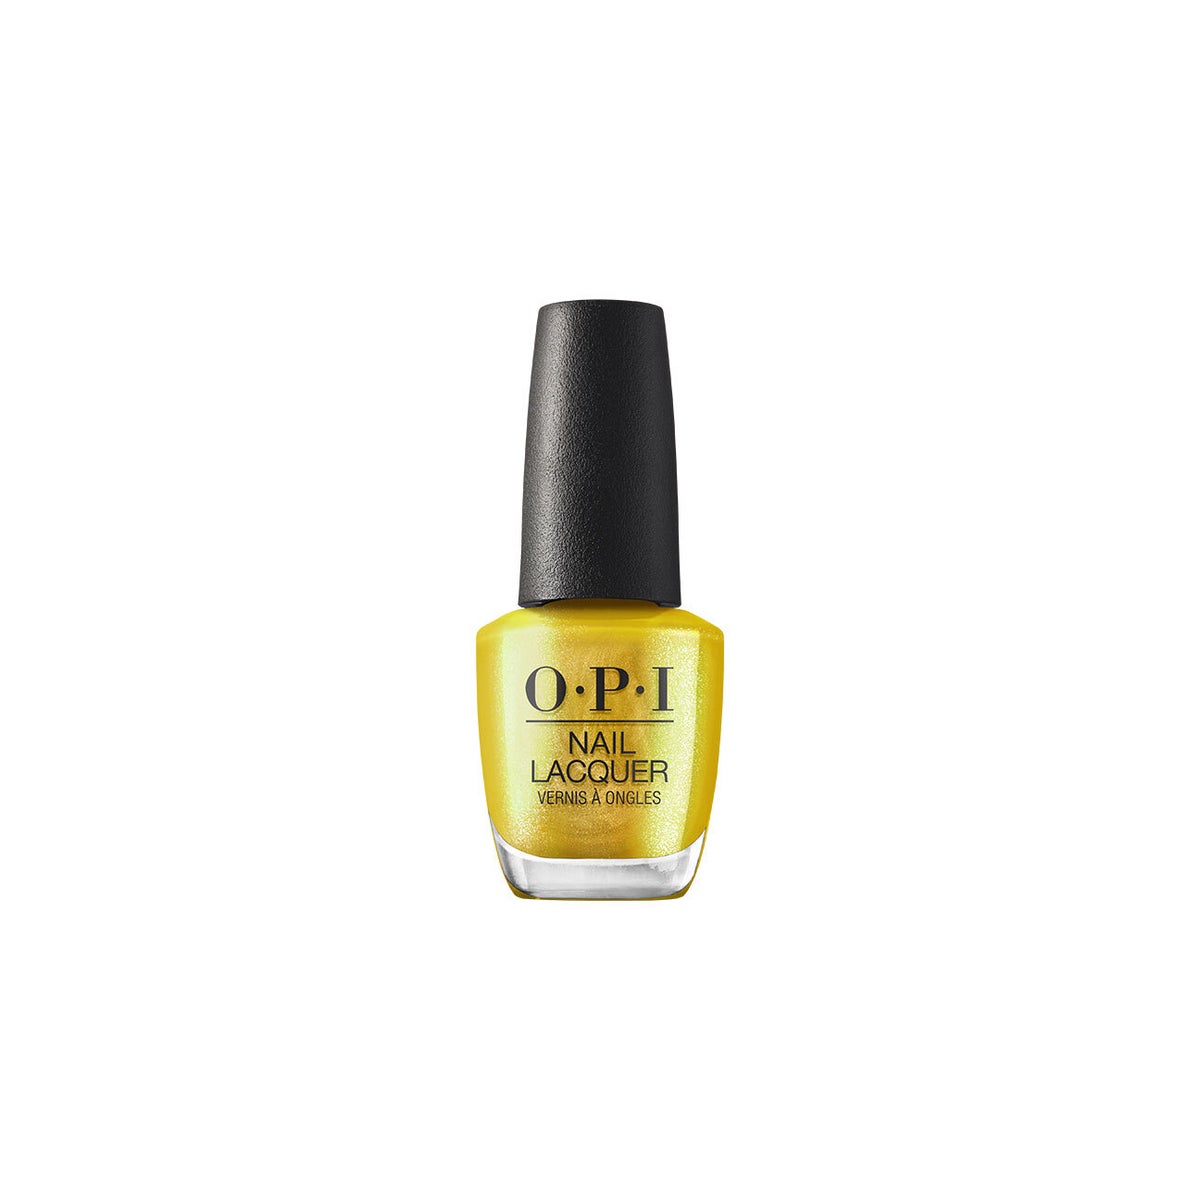 The Leo-nly One - OPI Nail Lacquer